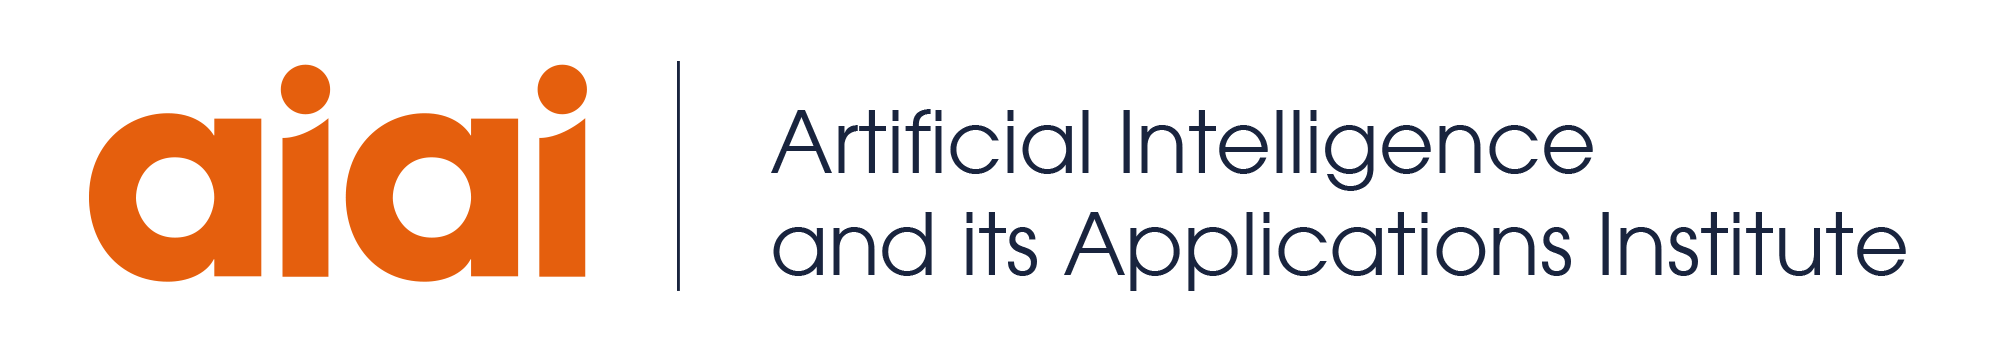 Artificial Intelligence Applications Institute (AIAI)